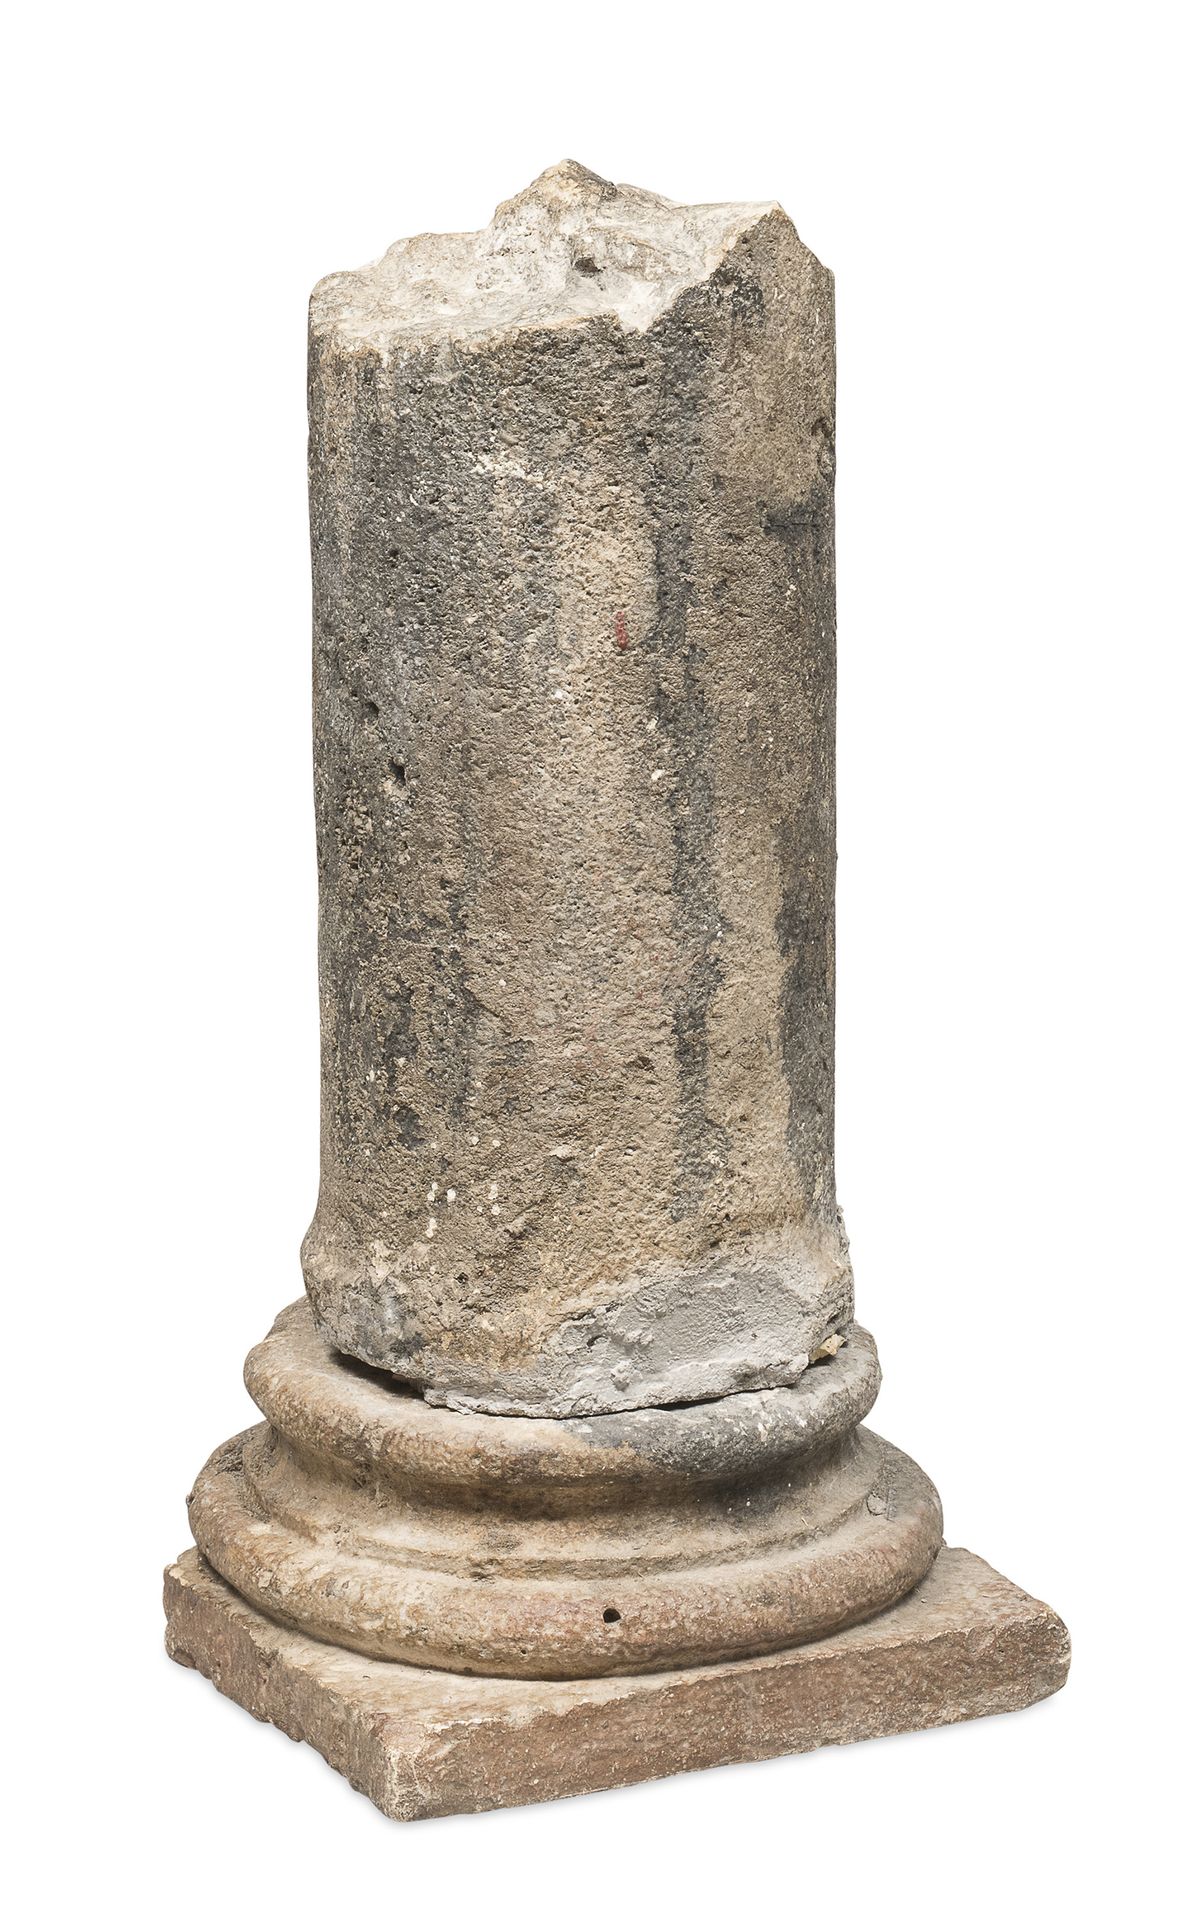 Null FRAGMENT OF A MARBLE COLUMN, 16TH CENTURY